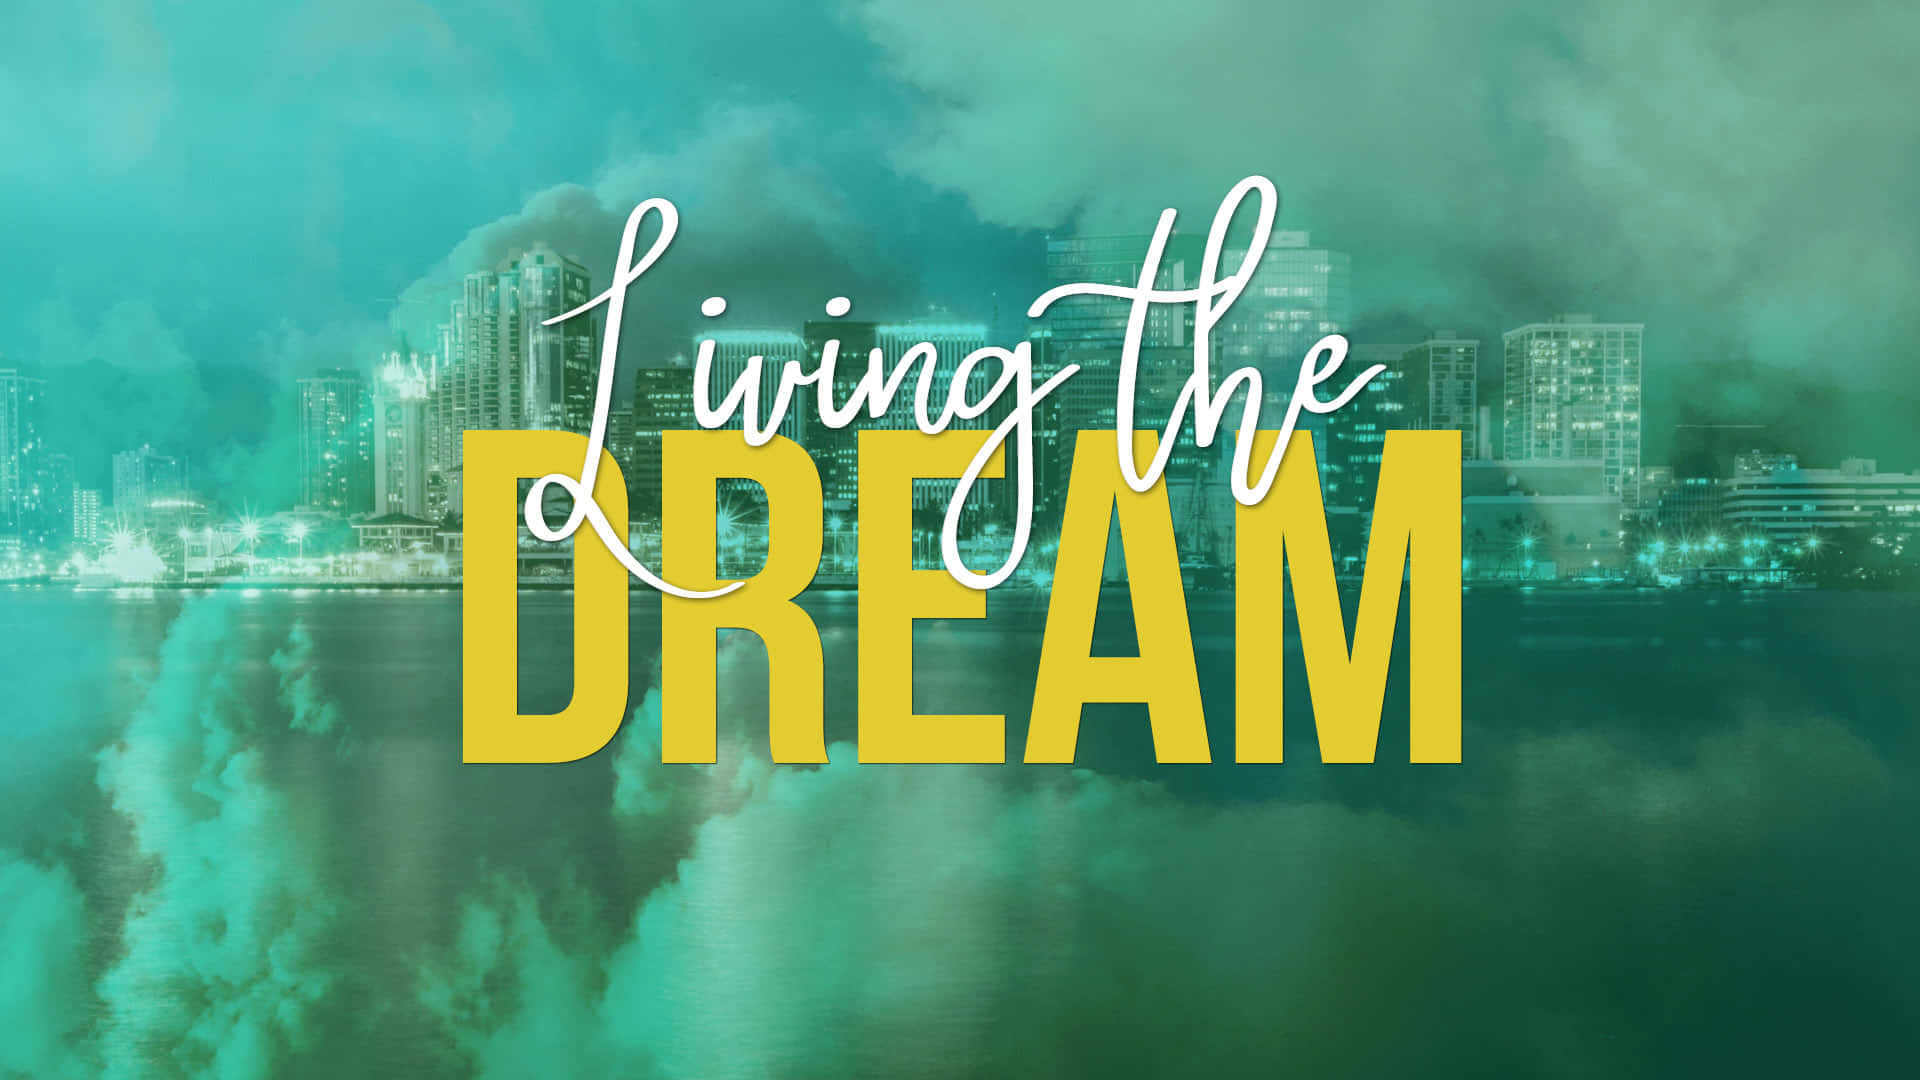 Living The Dream - A Cityscape With The Words